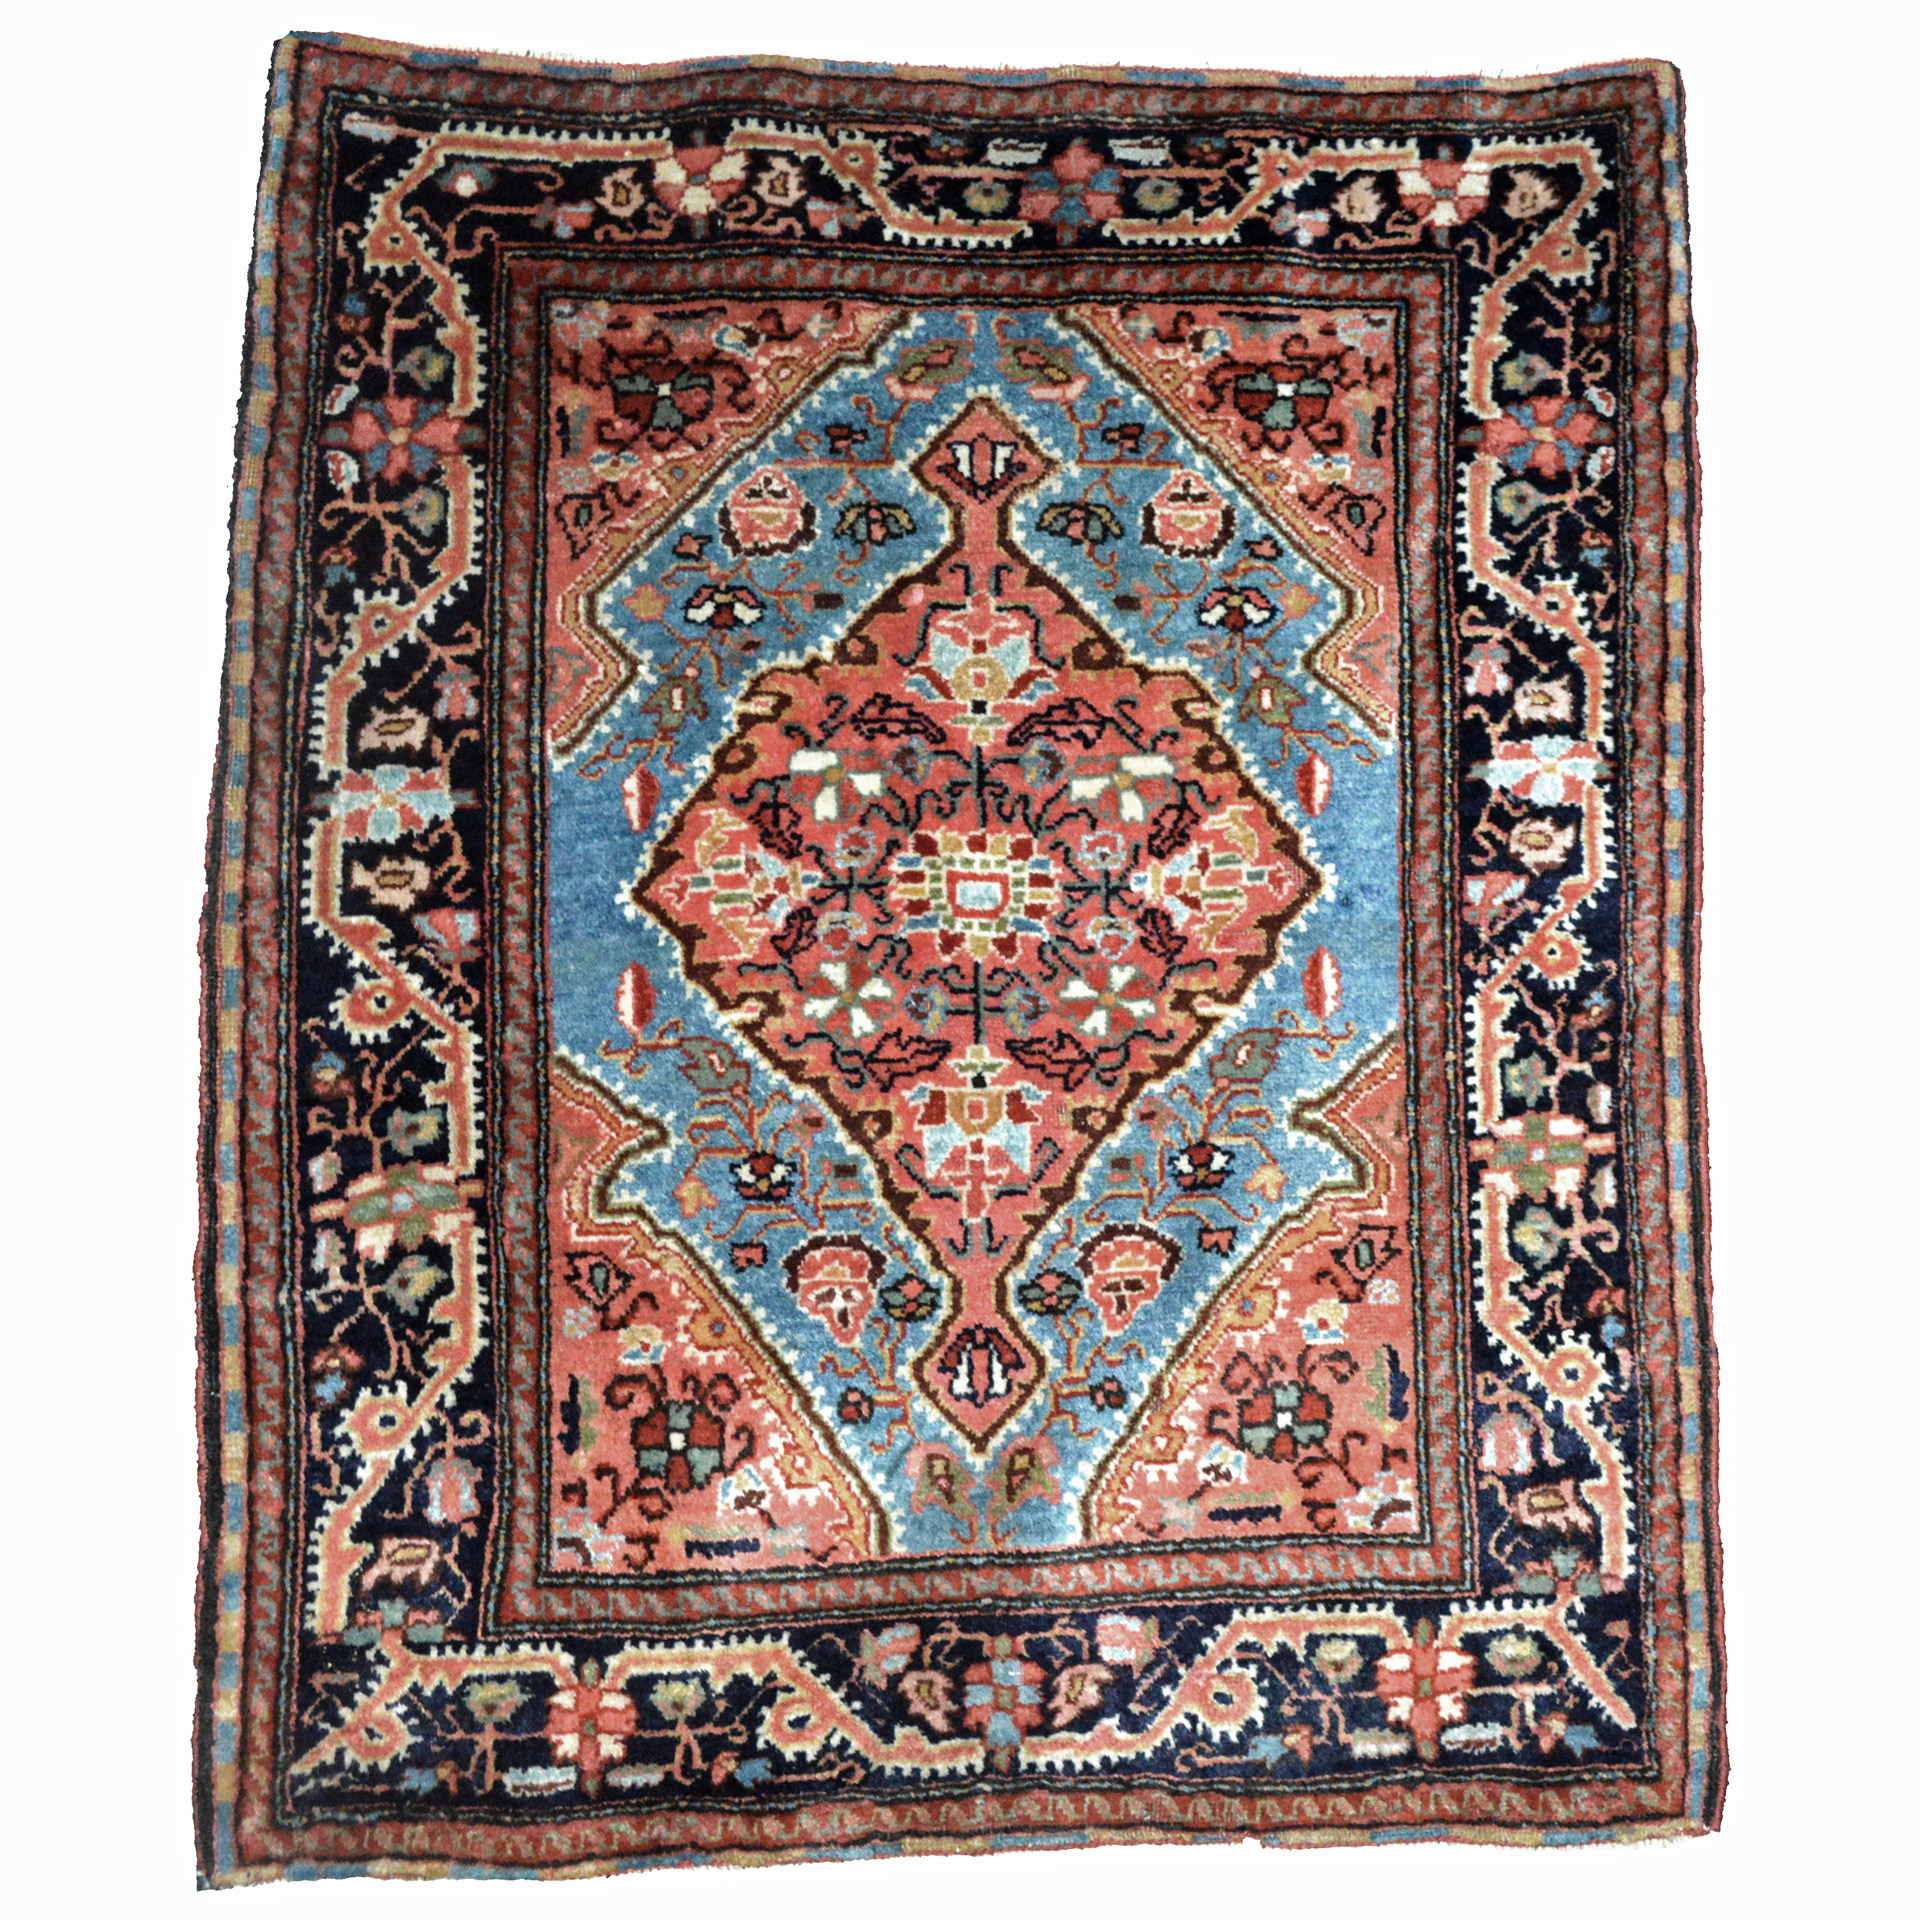 A small antique Persian Jozan Sarouk rug in the approximately 2' x 3' size sometimes referred to as a "mat" or "poshti'. The light blue field is decorated with a coral color medallion and framed by coral spandrels and a navy blue border. Douglas Stock Gallery, antique Oriental rugs Weston, Wellesley, Dover, Sherborn, South Natick,MA area, antique rugs New England